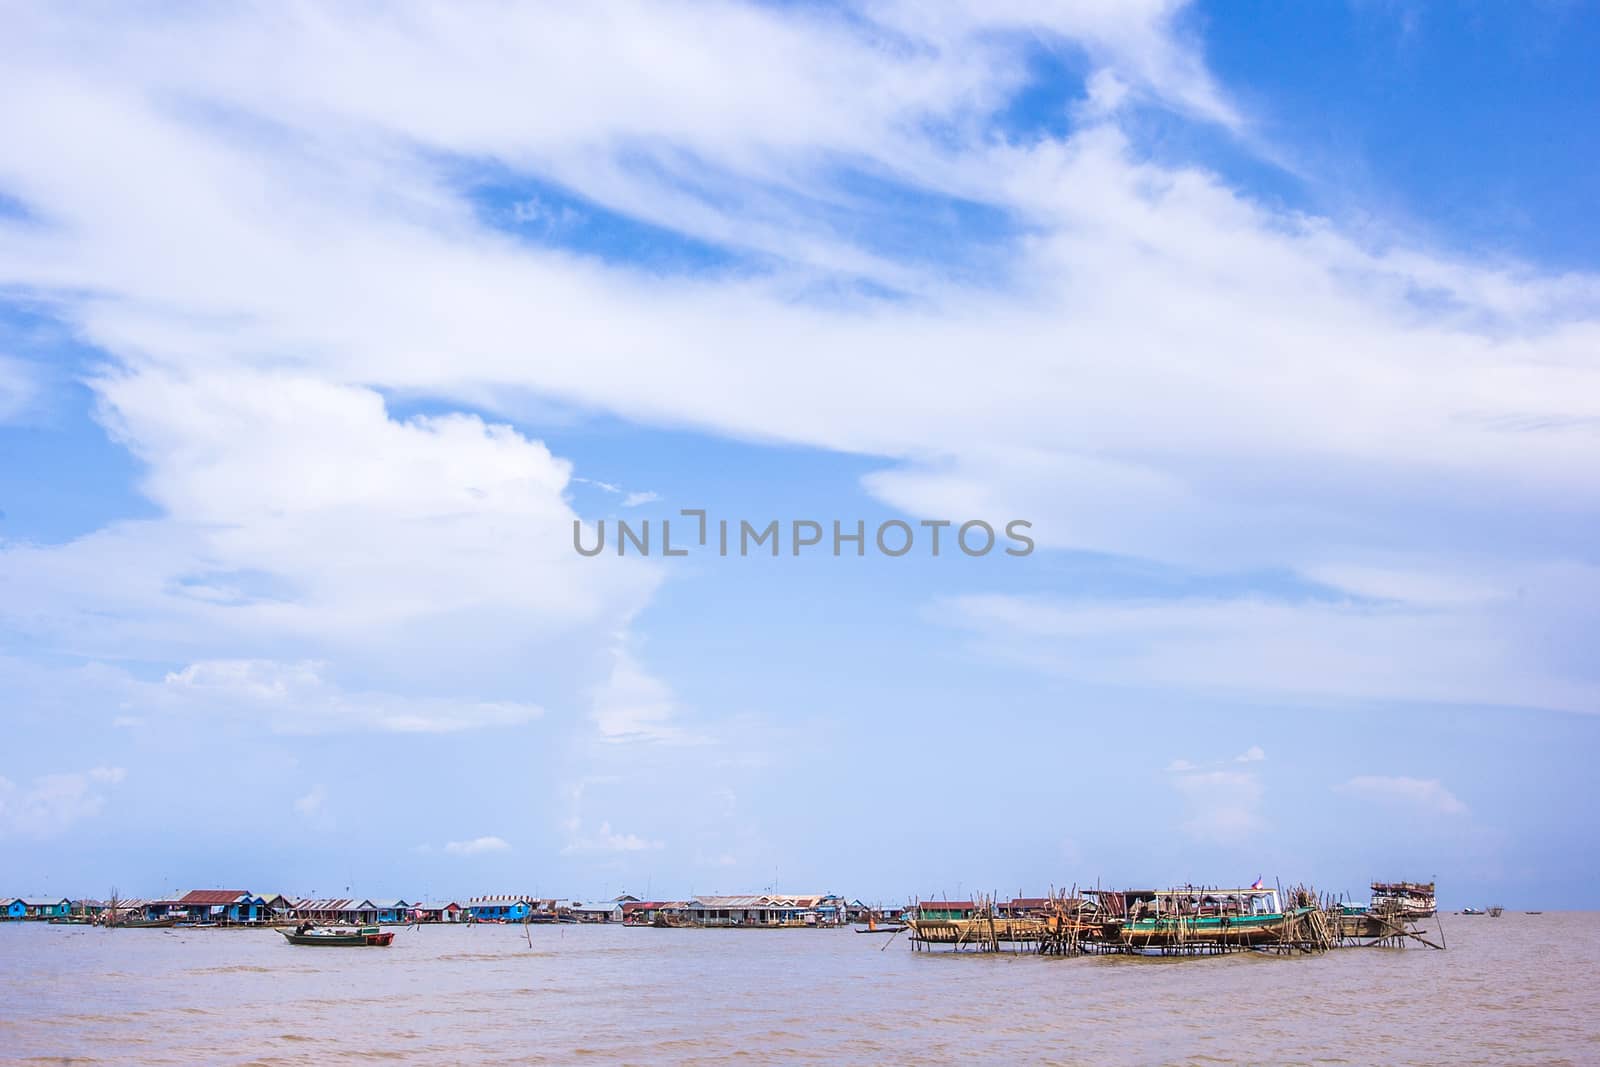 SIEM REAP, CAMBODIA - May 3: Cambodian people live beside Tonle Sap Lake in Siem Reap, Cambodia on May 3, 2014. Tonle Sap is the largest freshwater lake in SE Asia
